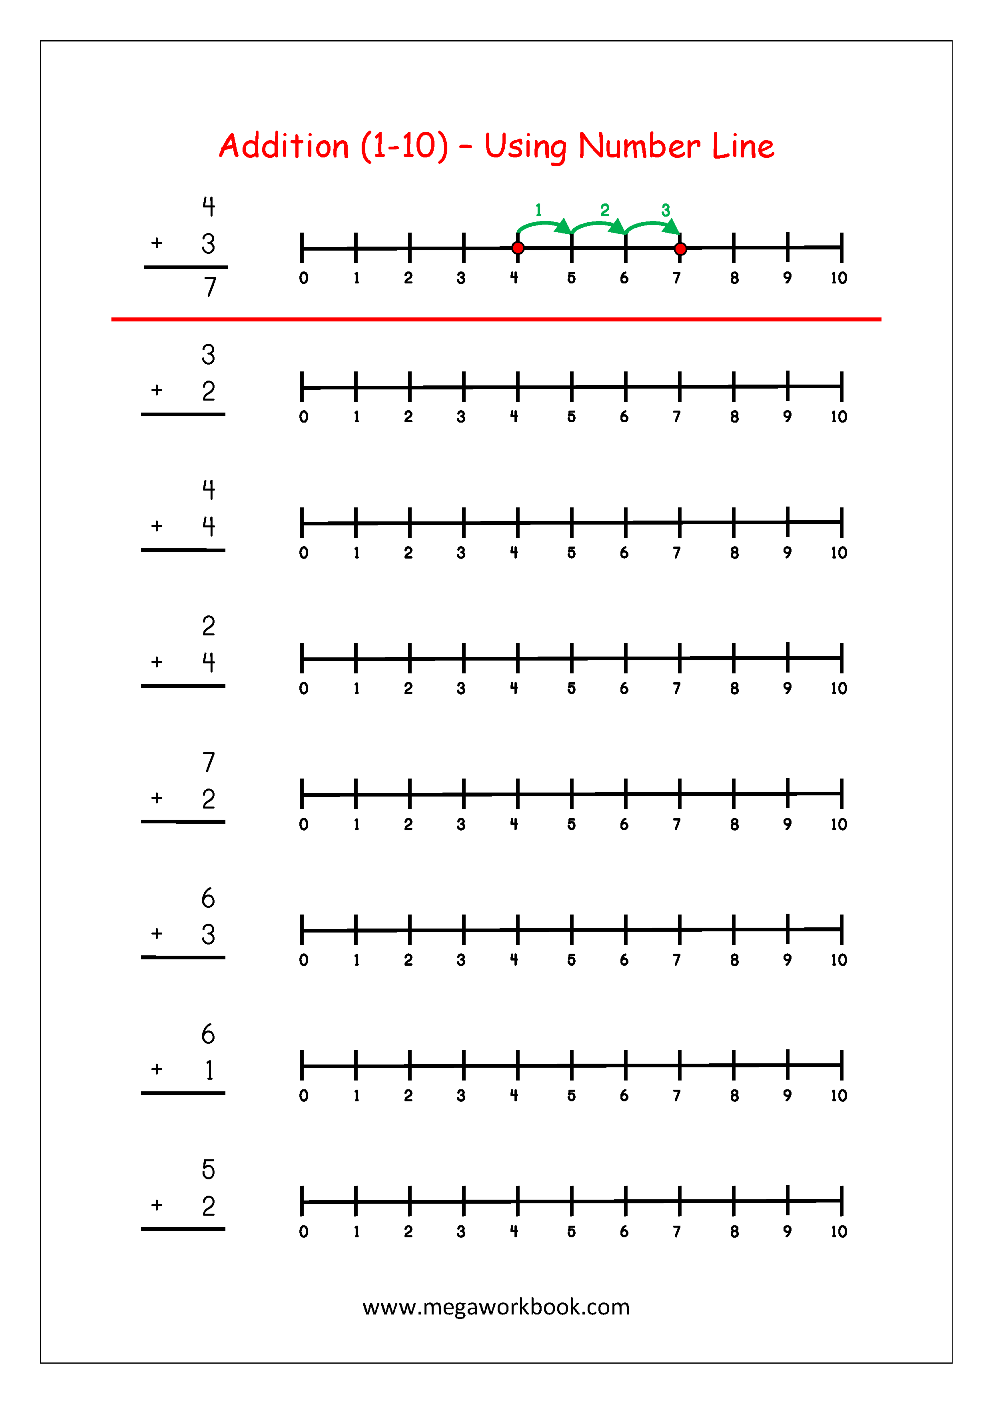 Free Printable Number Addition Worksheets (1-10) For Kindergarten And Grade 1- Addition On Number Line - Addition With Pictures/Objects - Megaworkbook